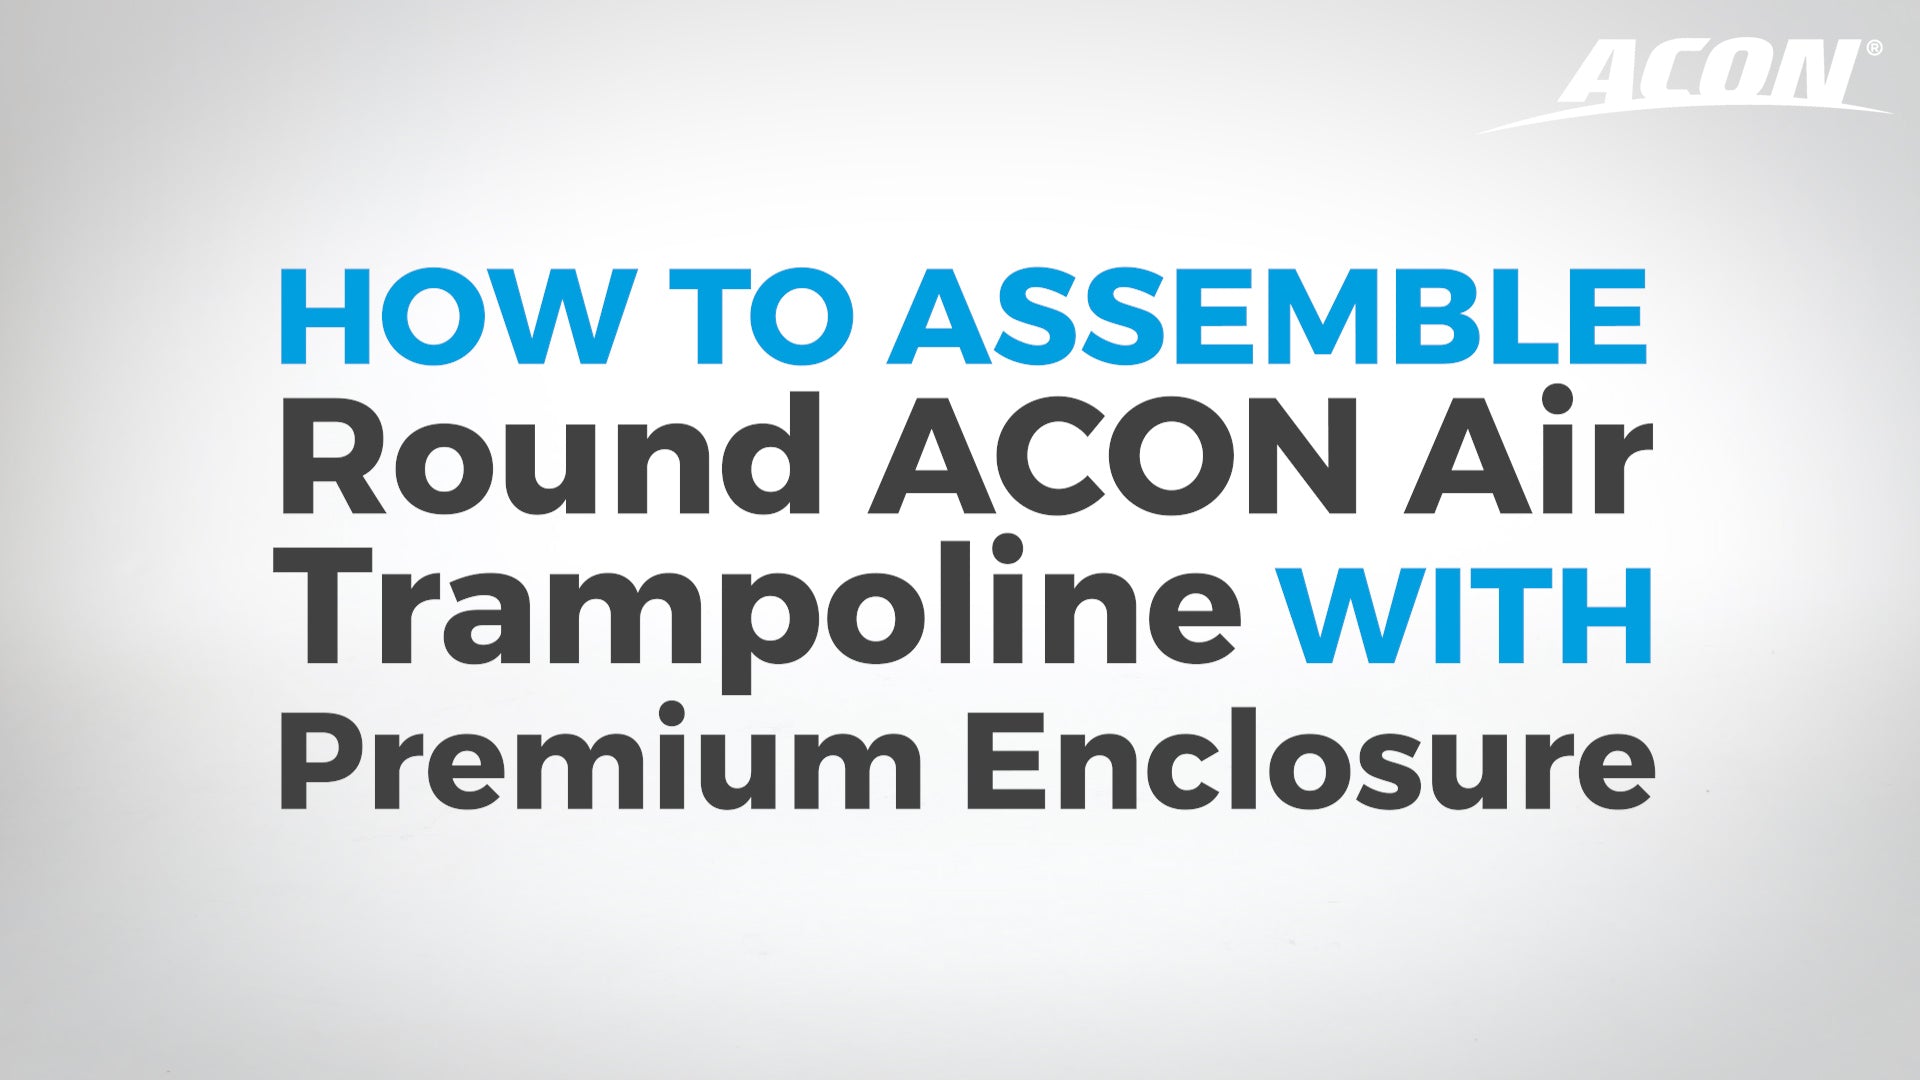 How to assemble Round Acon Air Trampoline with Premium Enclosure